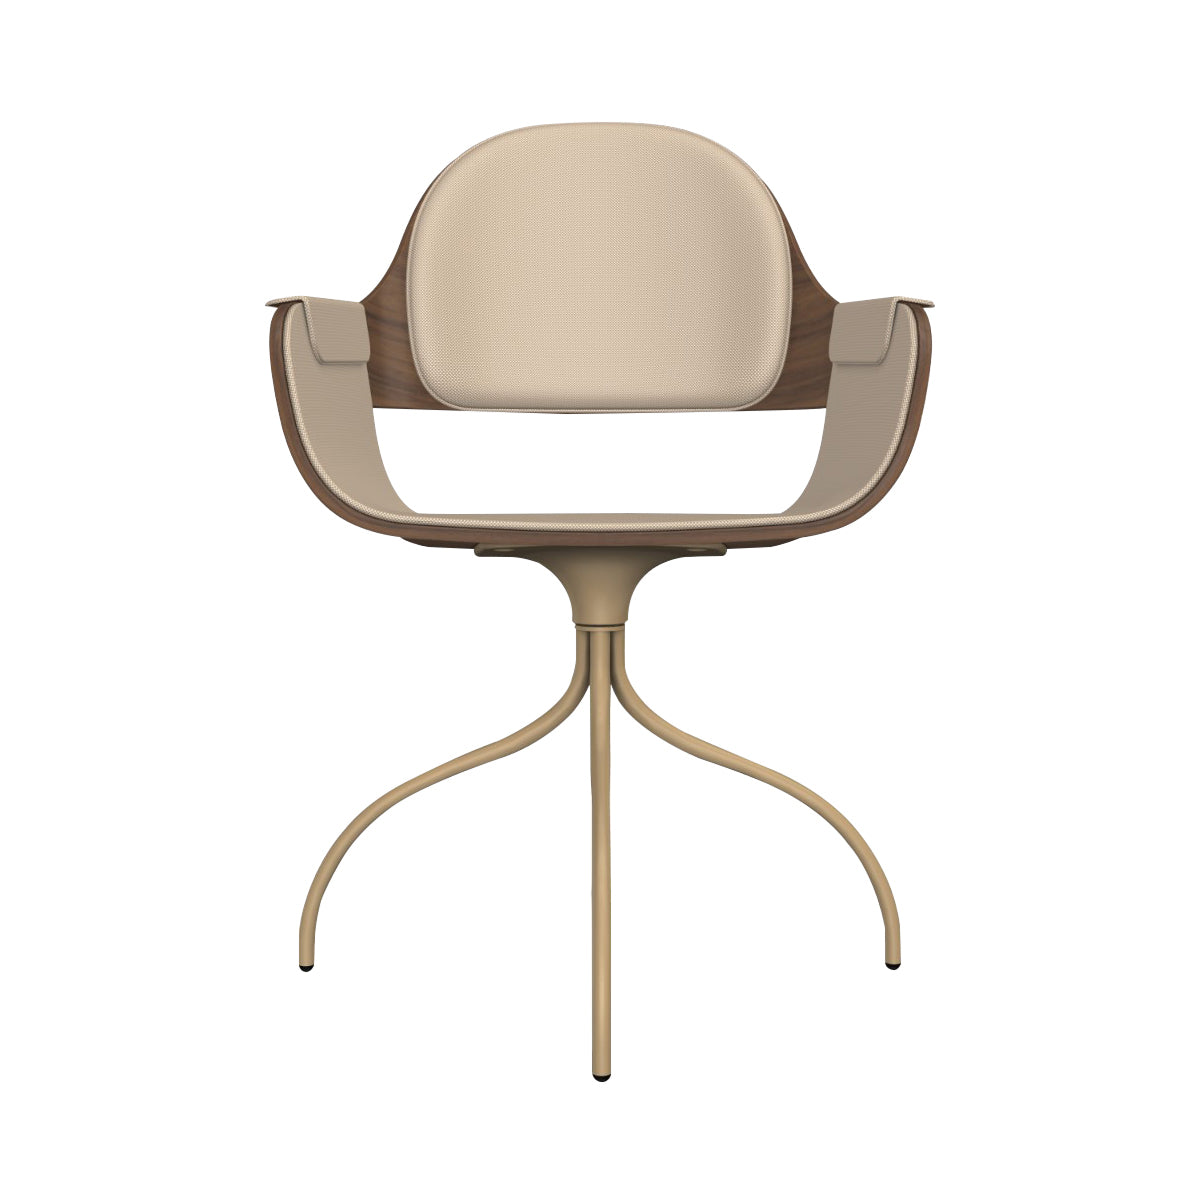 Showtime Nude Chair with Swivel Base: Interior Seat + Backrest Cushion + Walnut + Beige